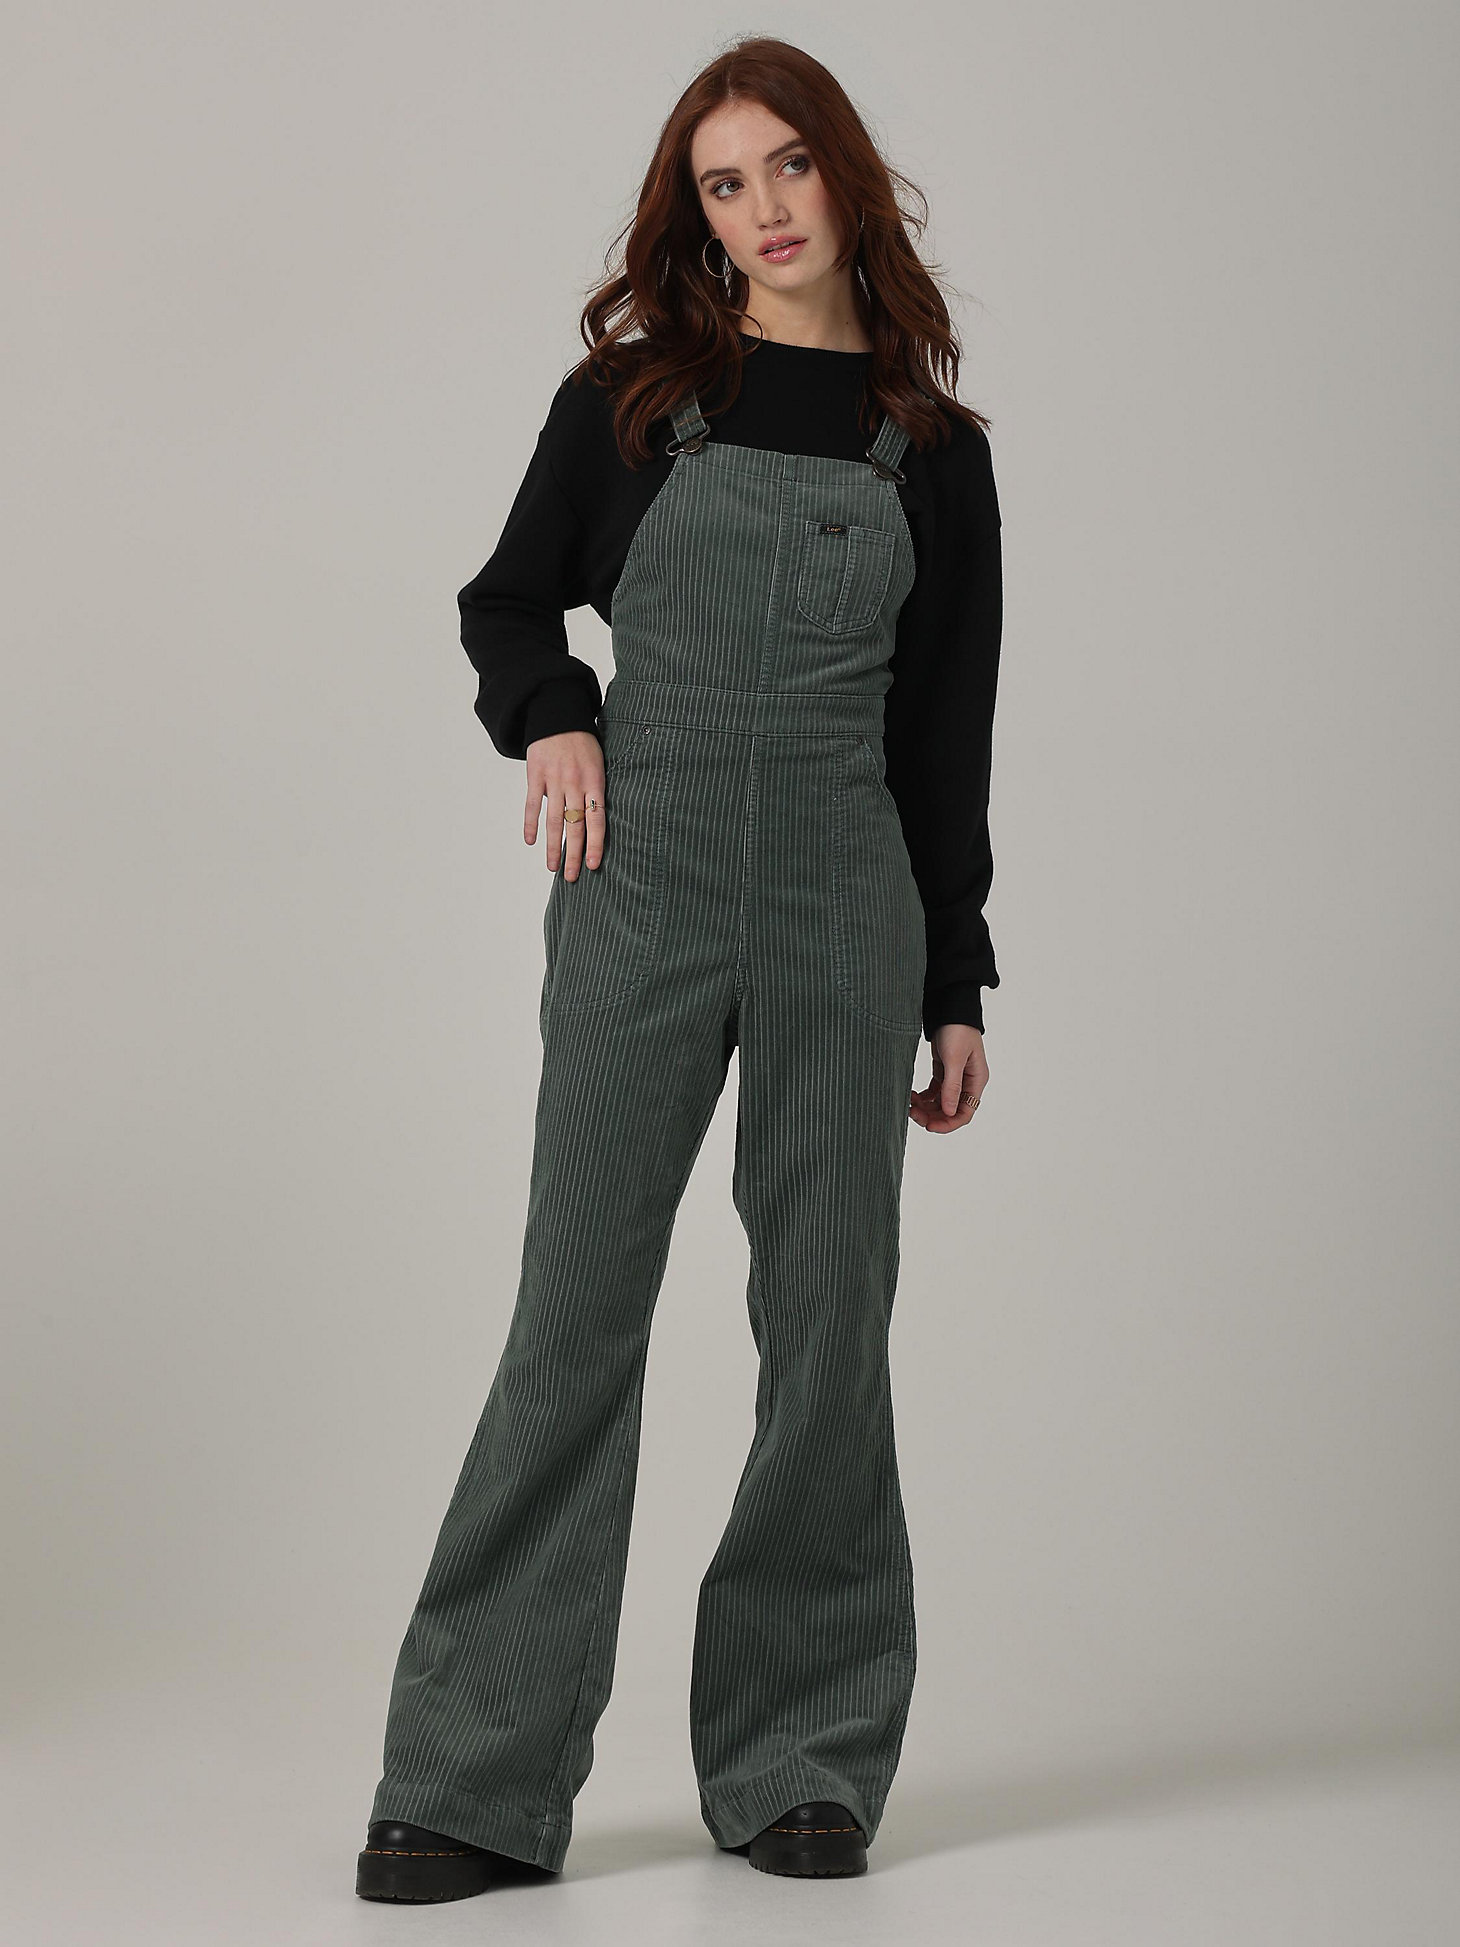 Women's Lee European Collection Factory Flare Overall in Fort Green main view